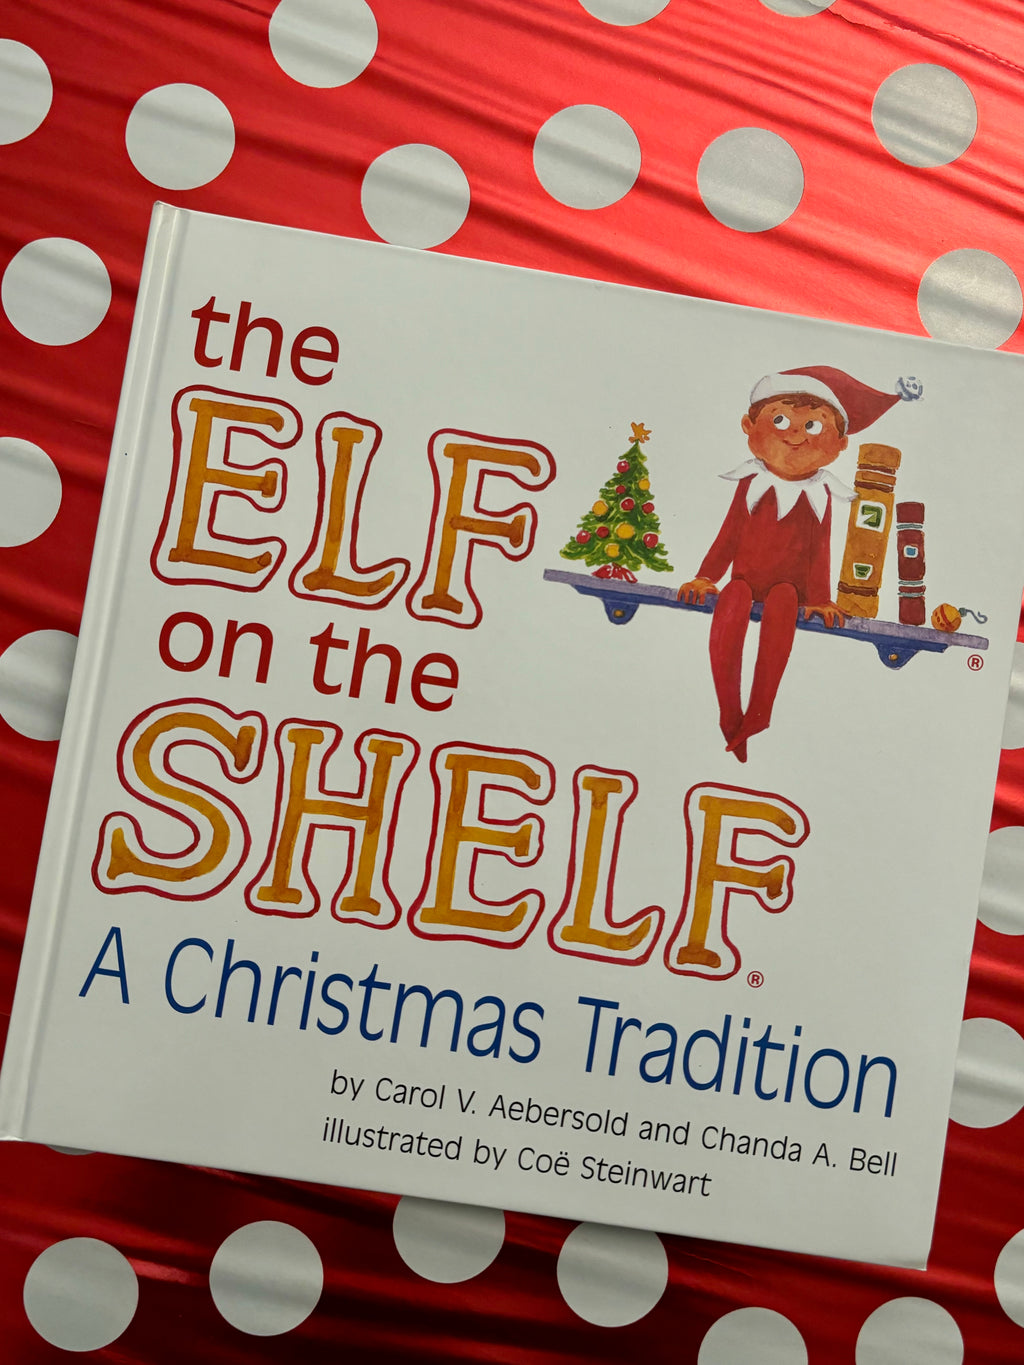 The Elf on the Shelf: A Christmas Tradition- By Carol V. Aebersold and Chanda A. Bell